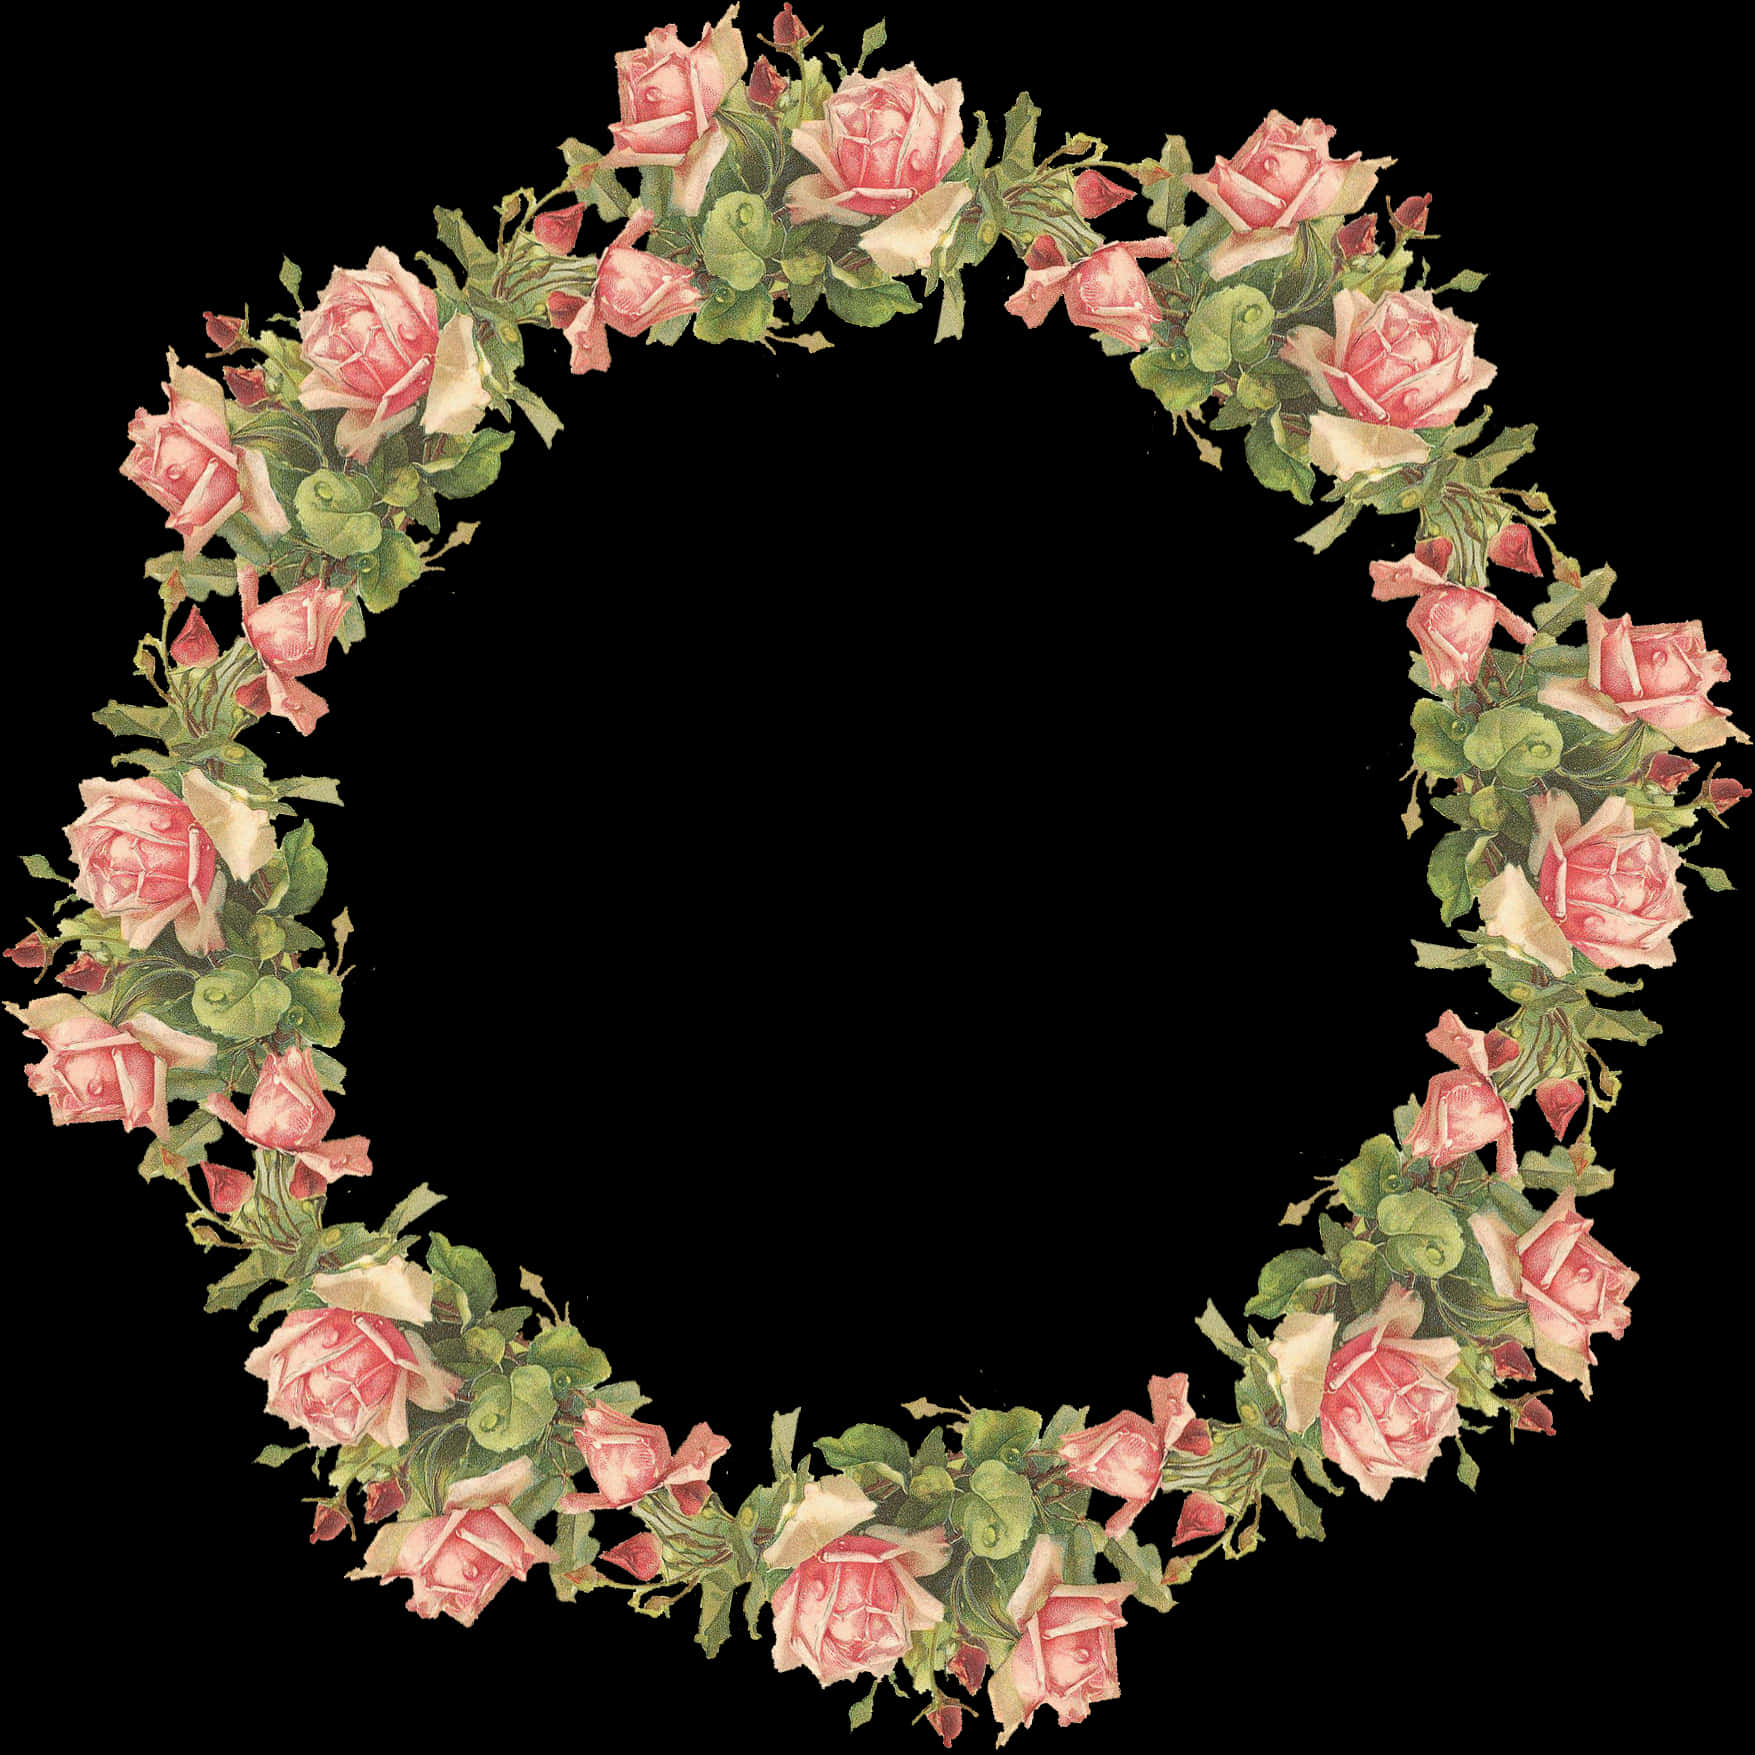 A Wreath Of Pink Roses And Green Leaves